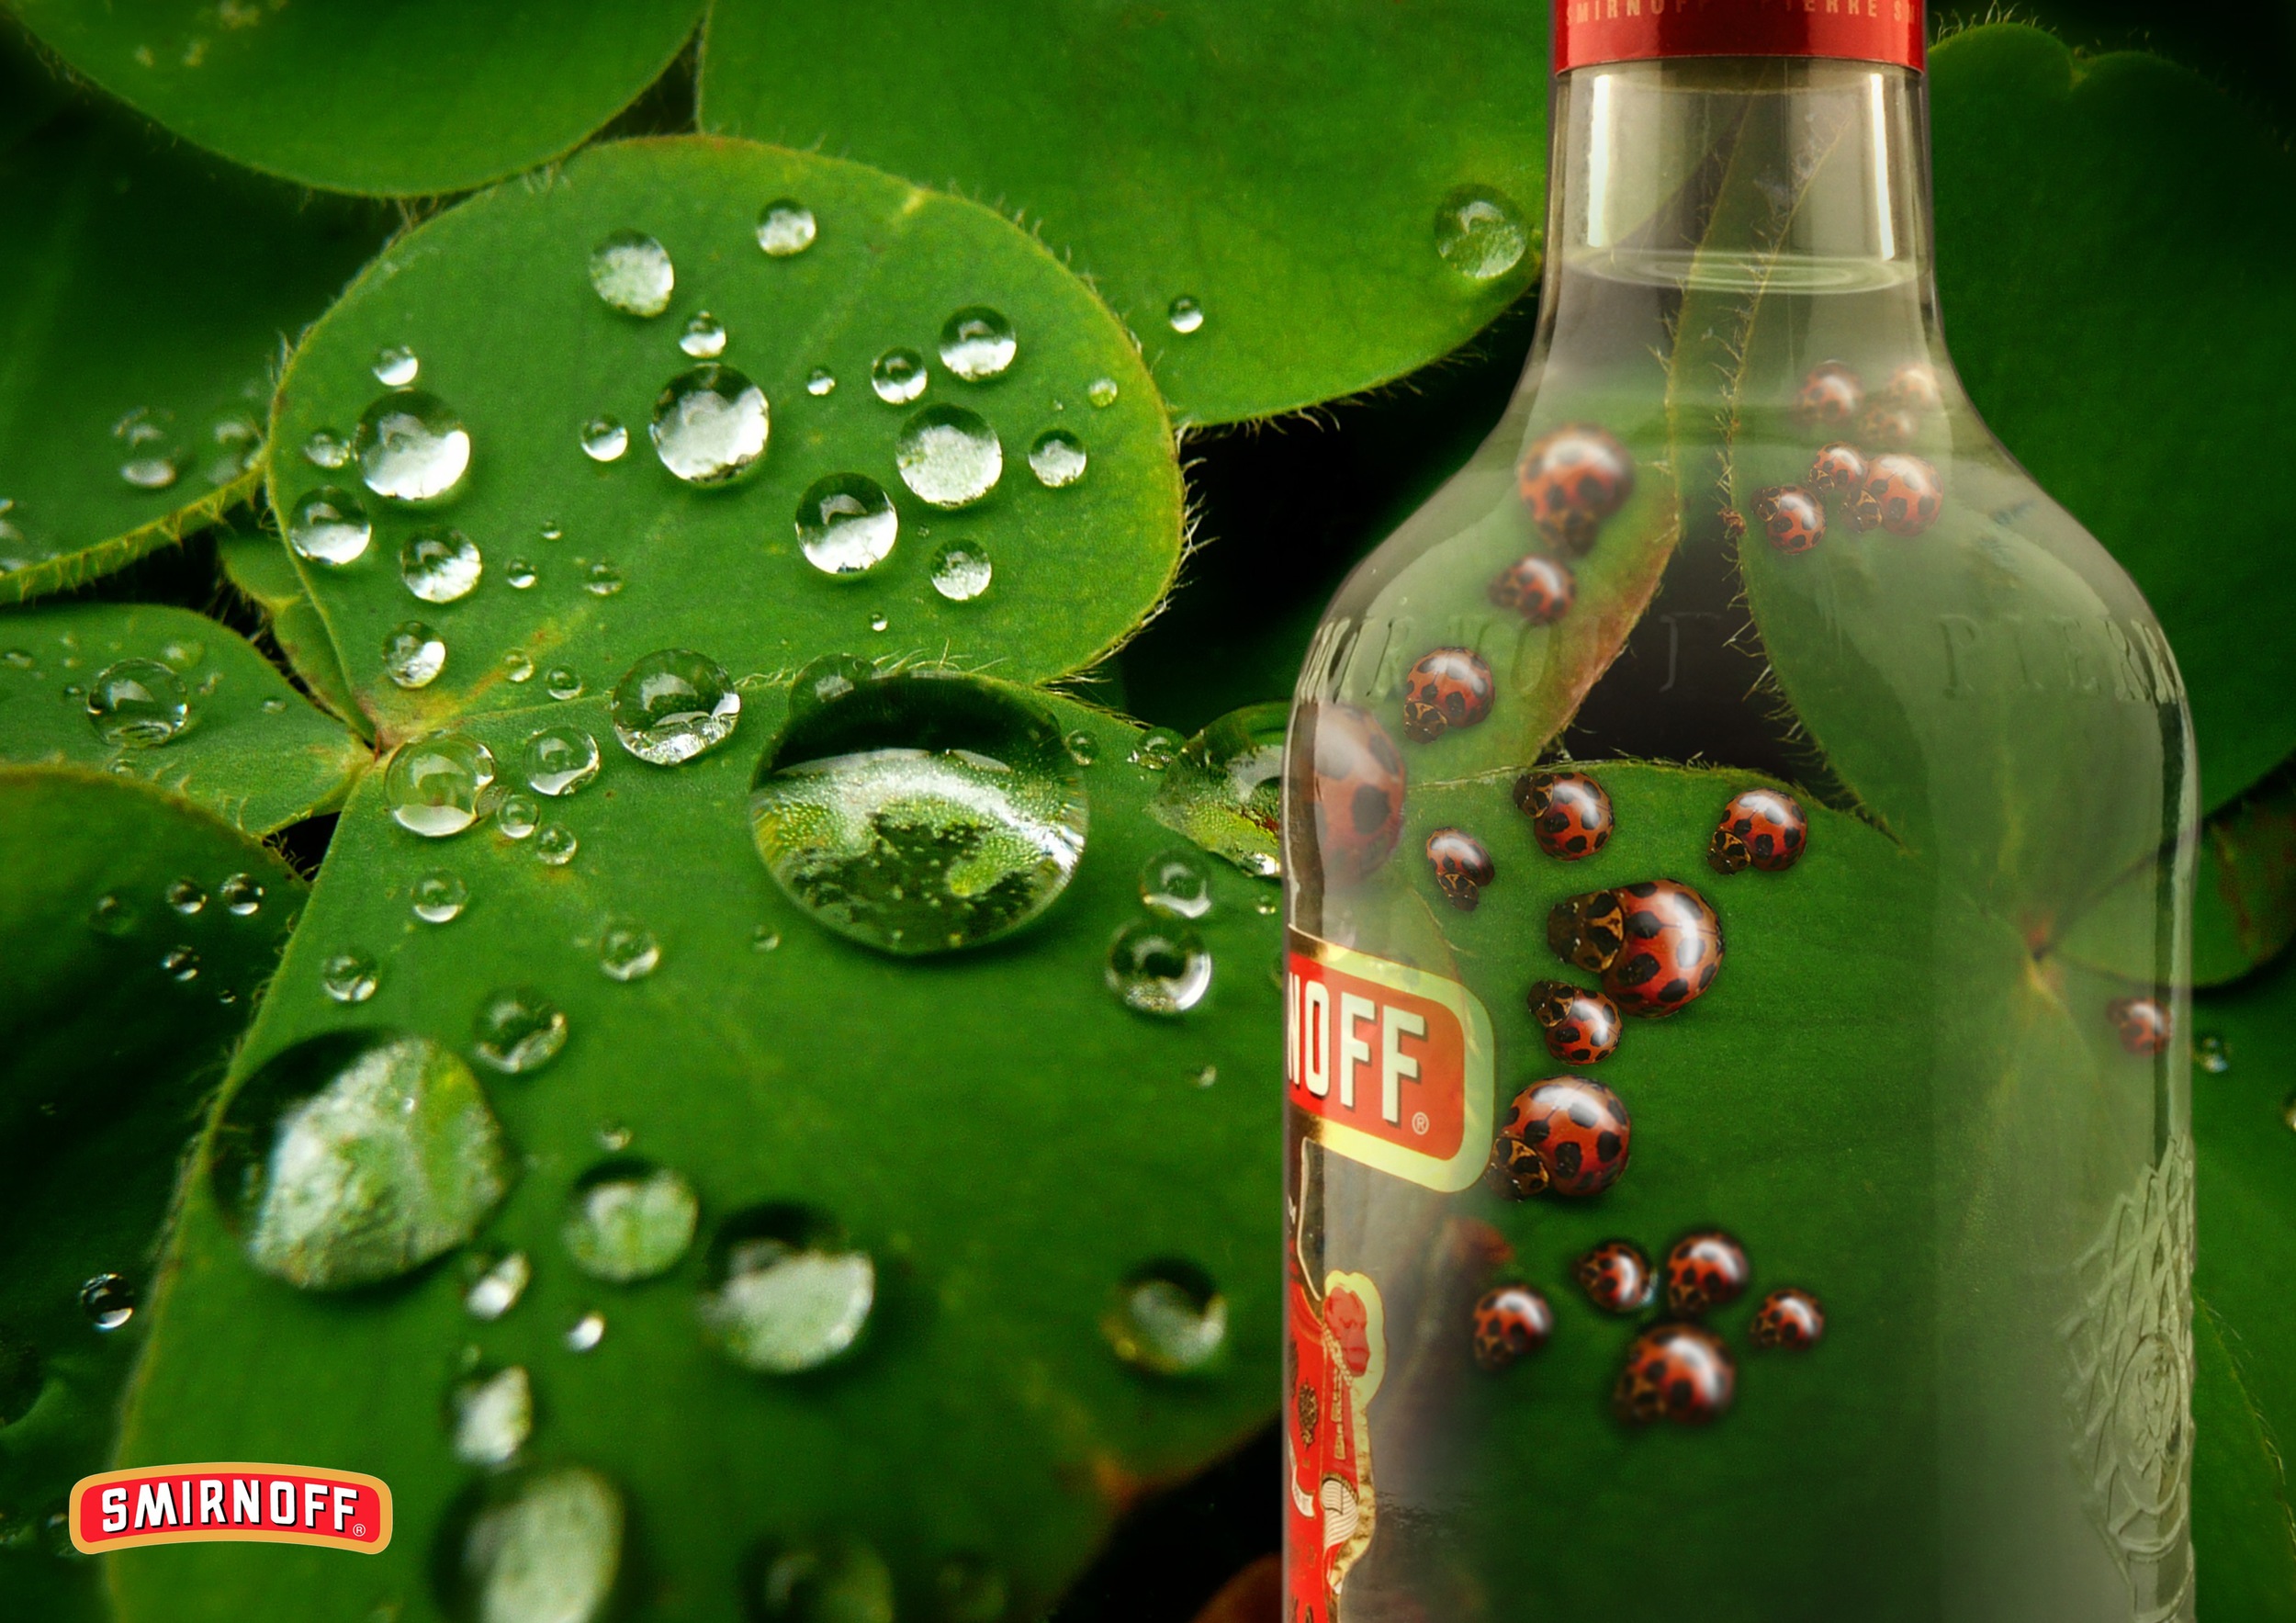  Year 1 - Our task was to mimic the Smirnoff ad concept where a greater scene was portrayed through the bottle. This ad depicts waster droplets transformed into ladybirds.&nbsp; 